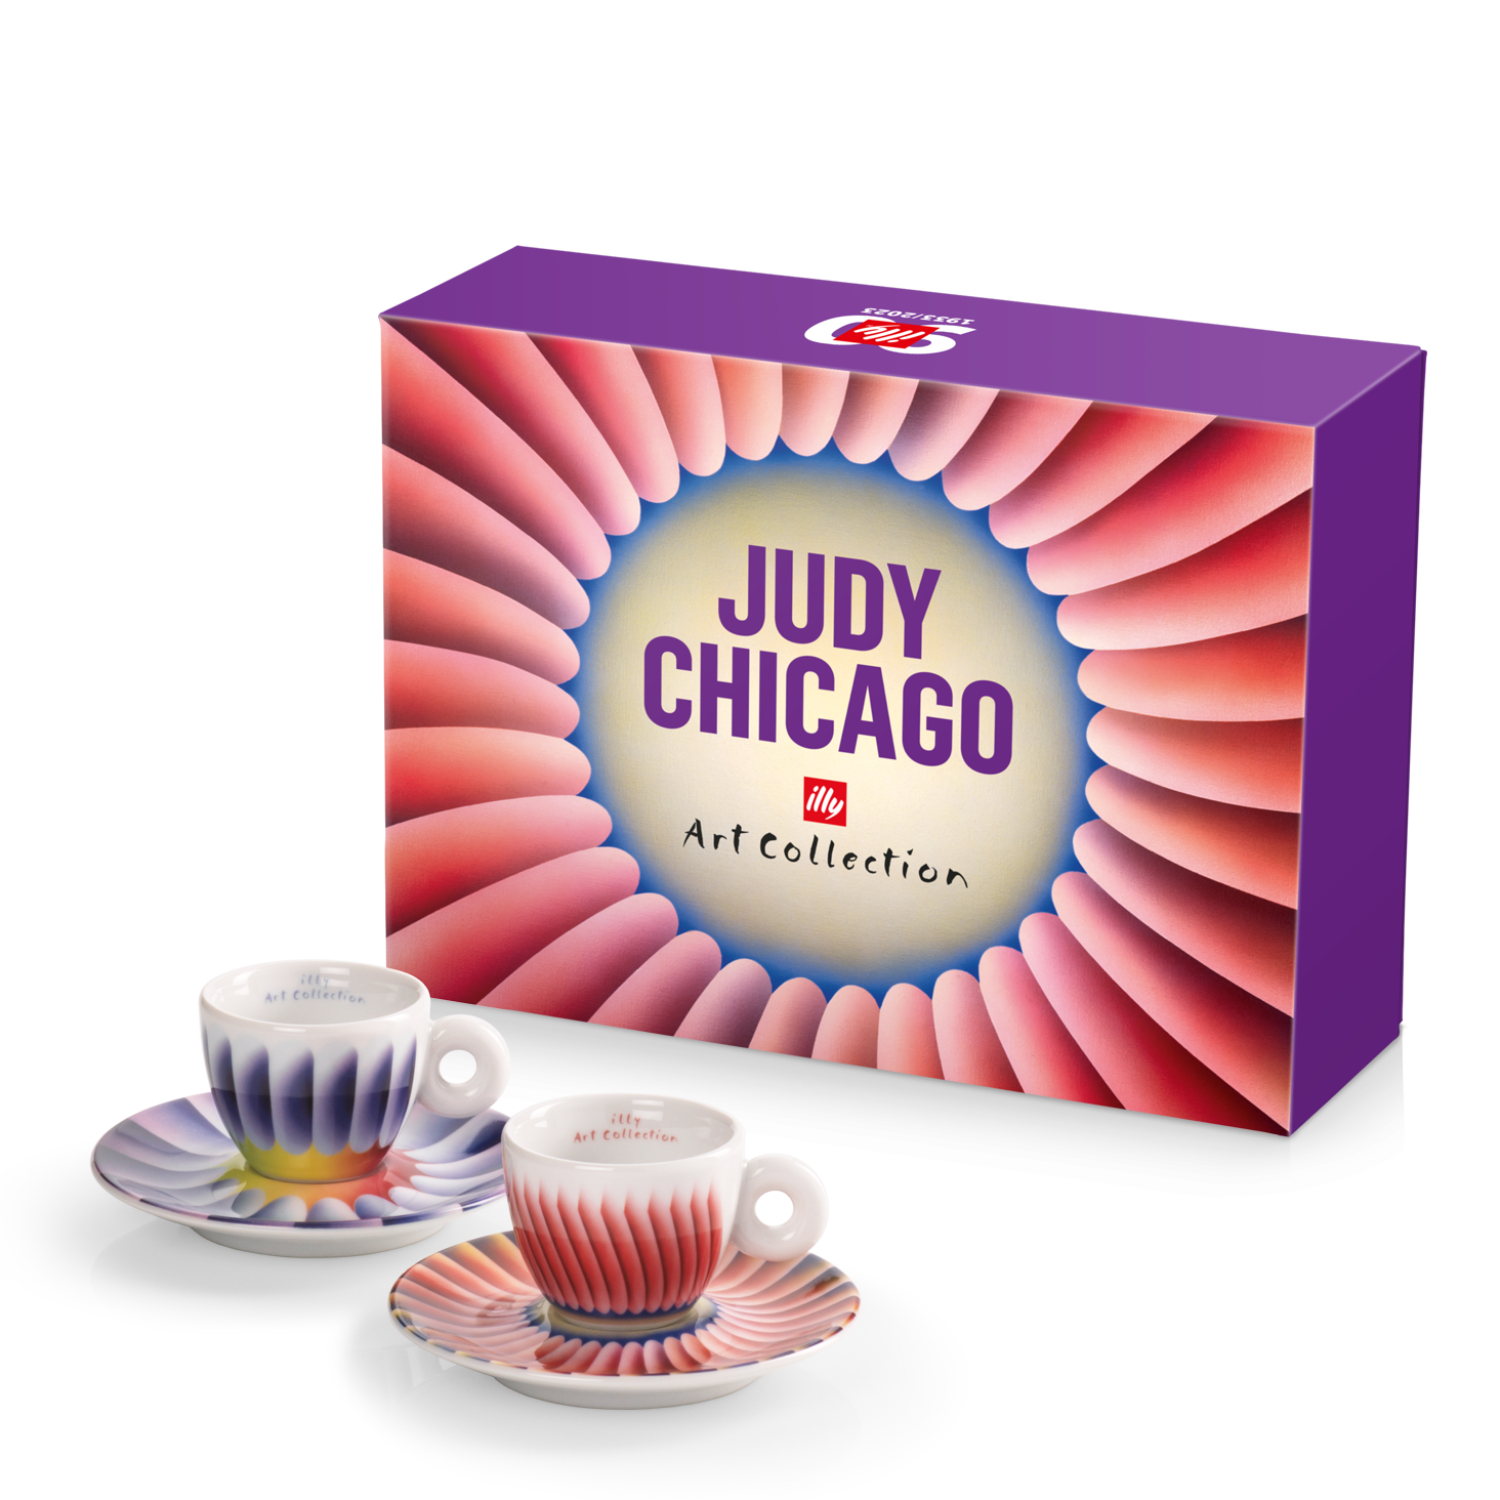 illy Art Collection JUDY CHICAGO Gift Set 2 Espresso Cups, Cups, 02-02-2015